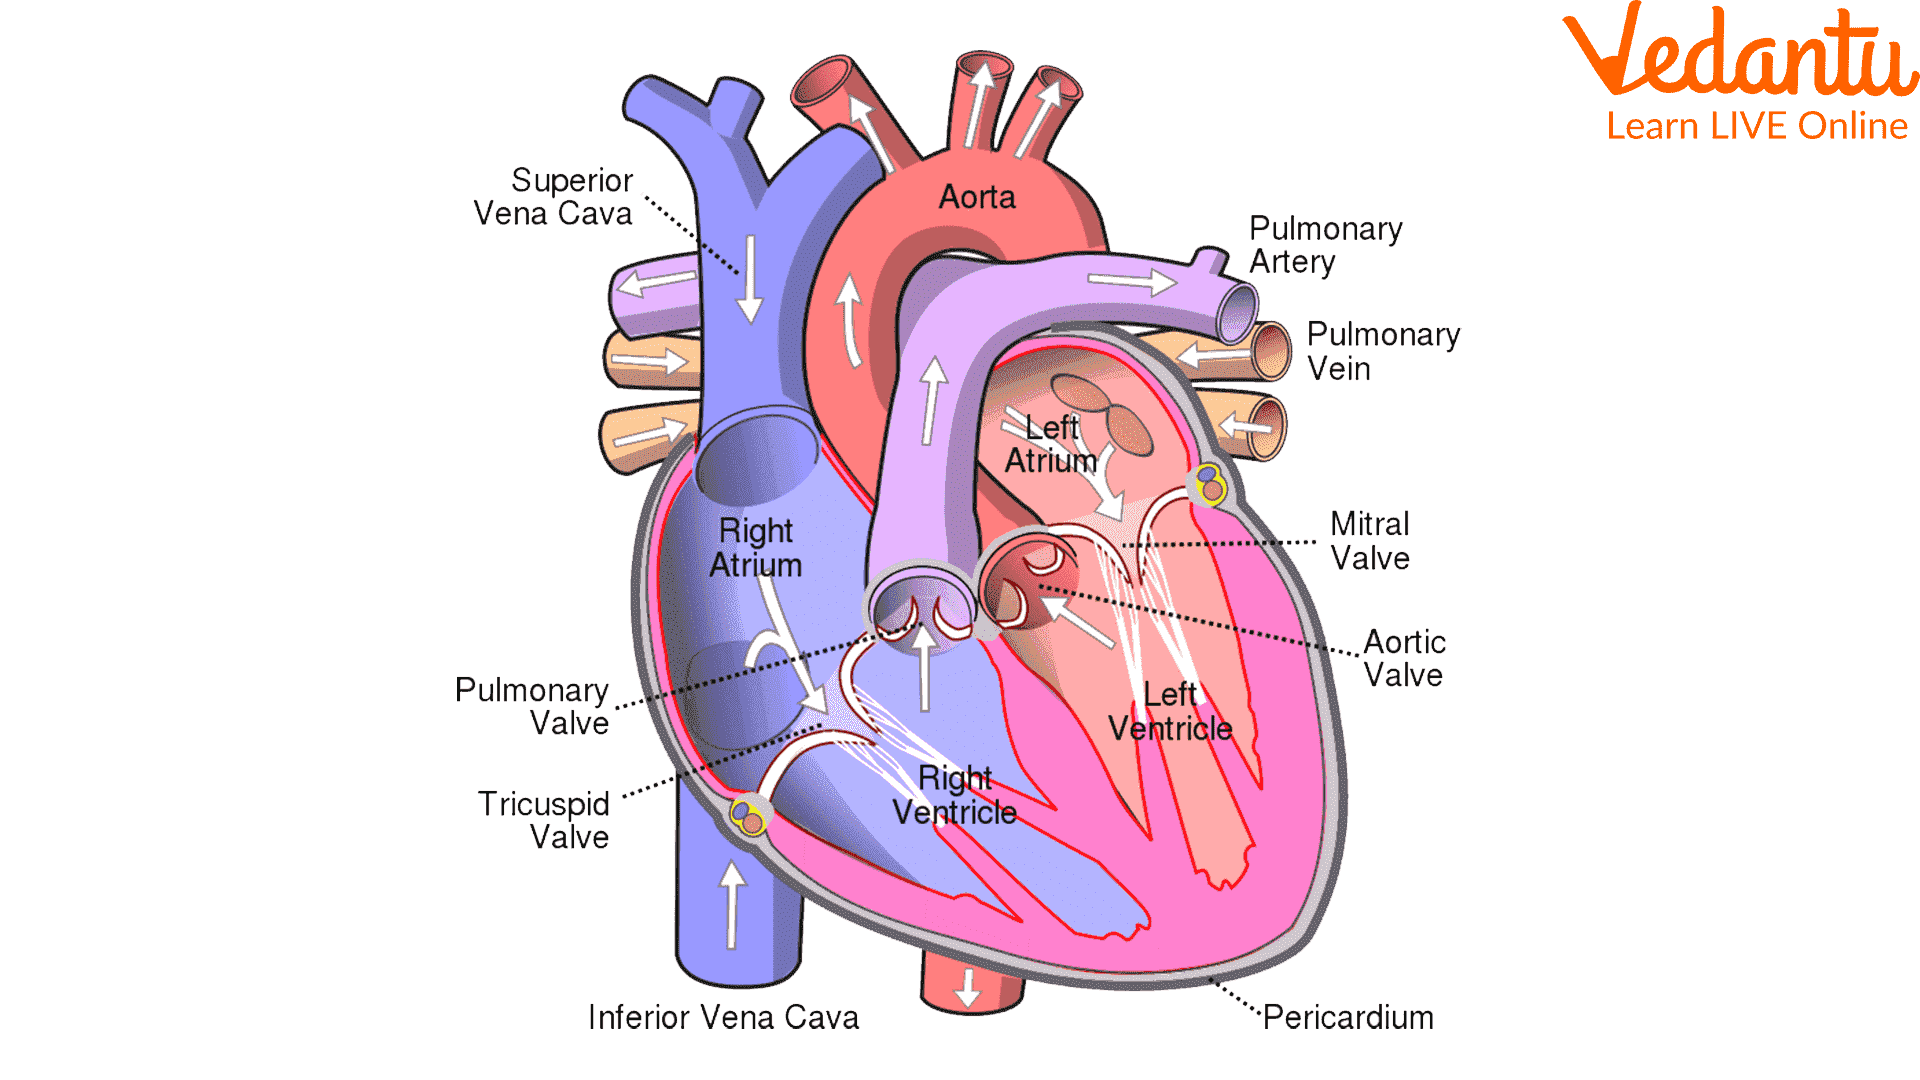 Structure of Heart